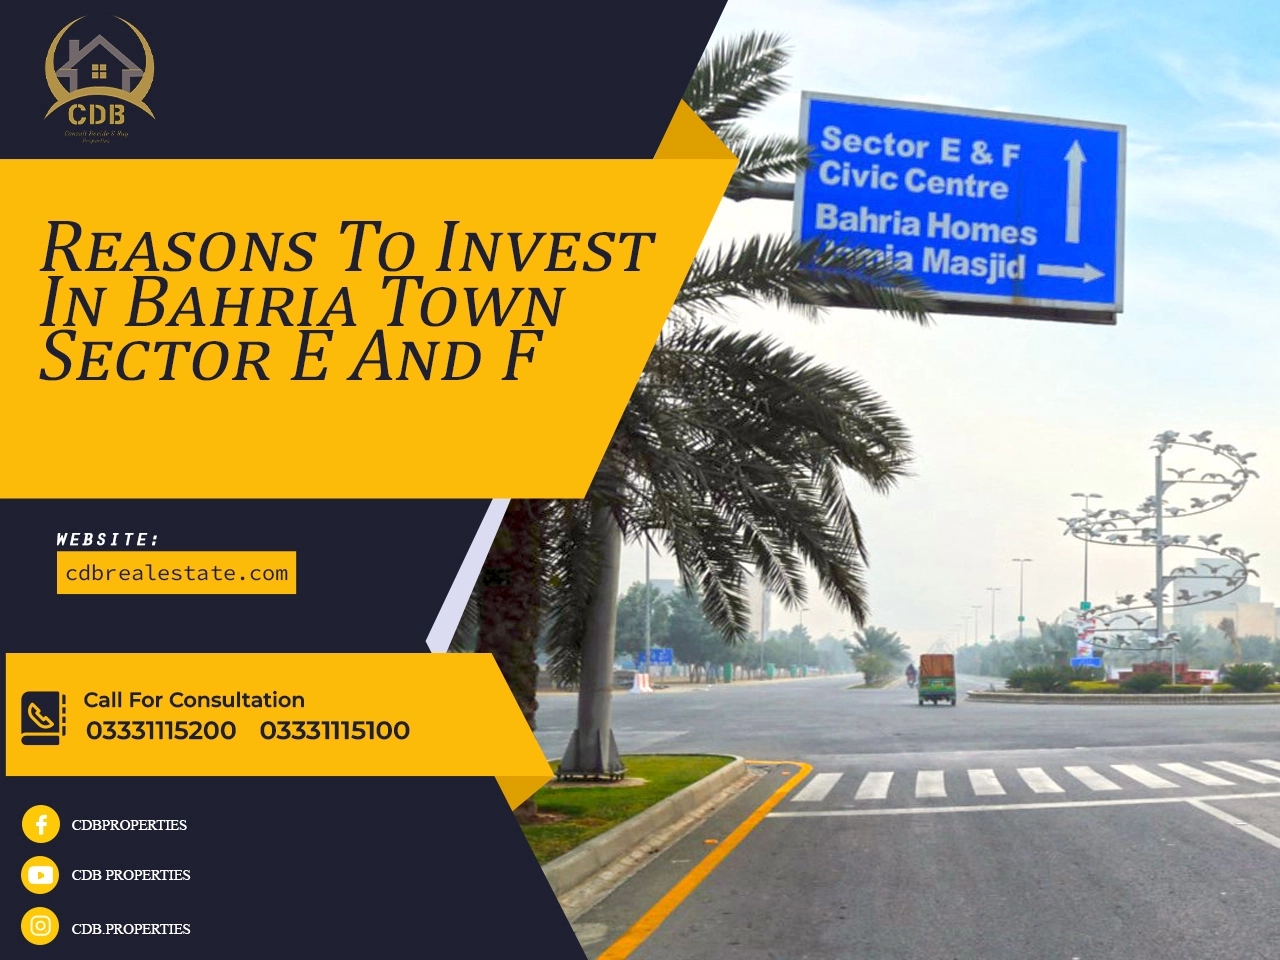 Reason to invest in bahria town sector E and F